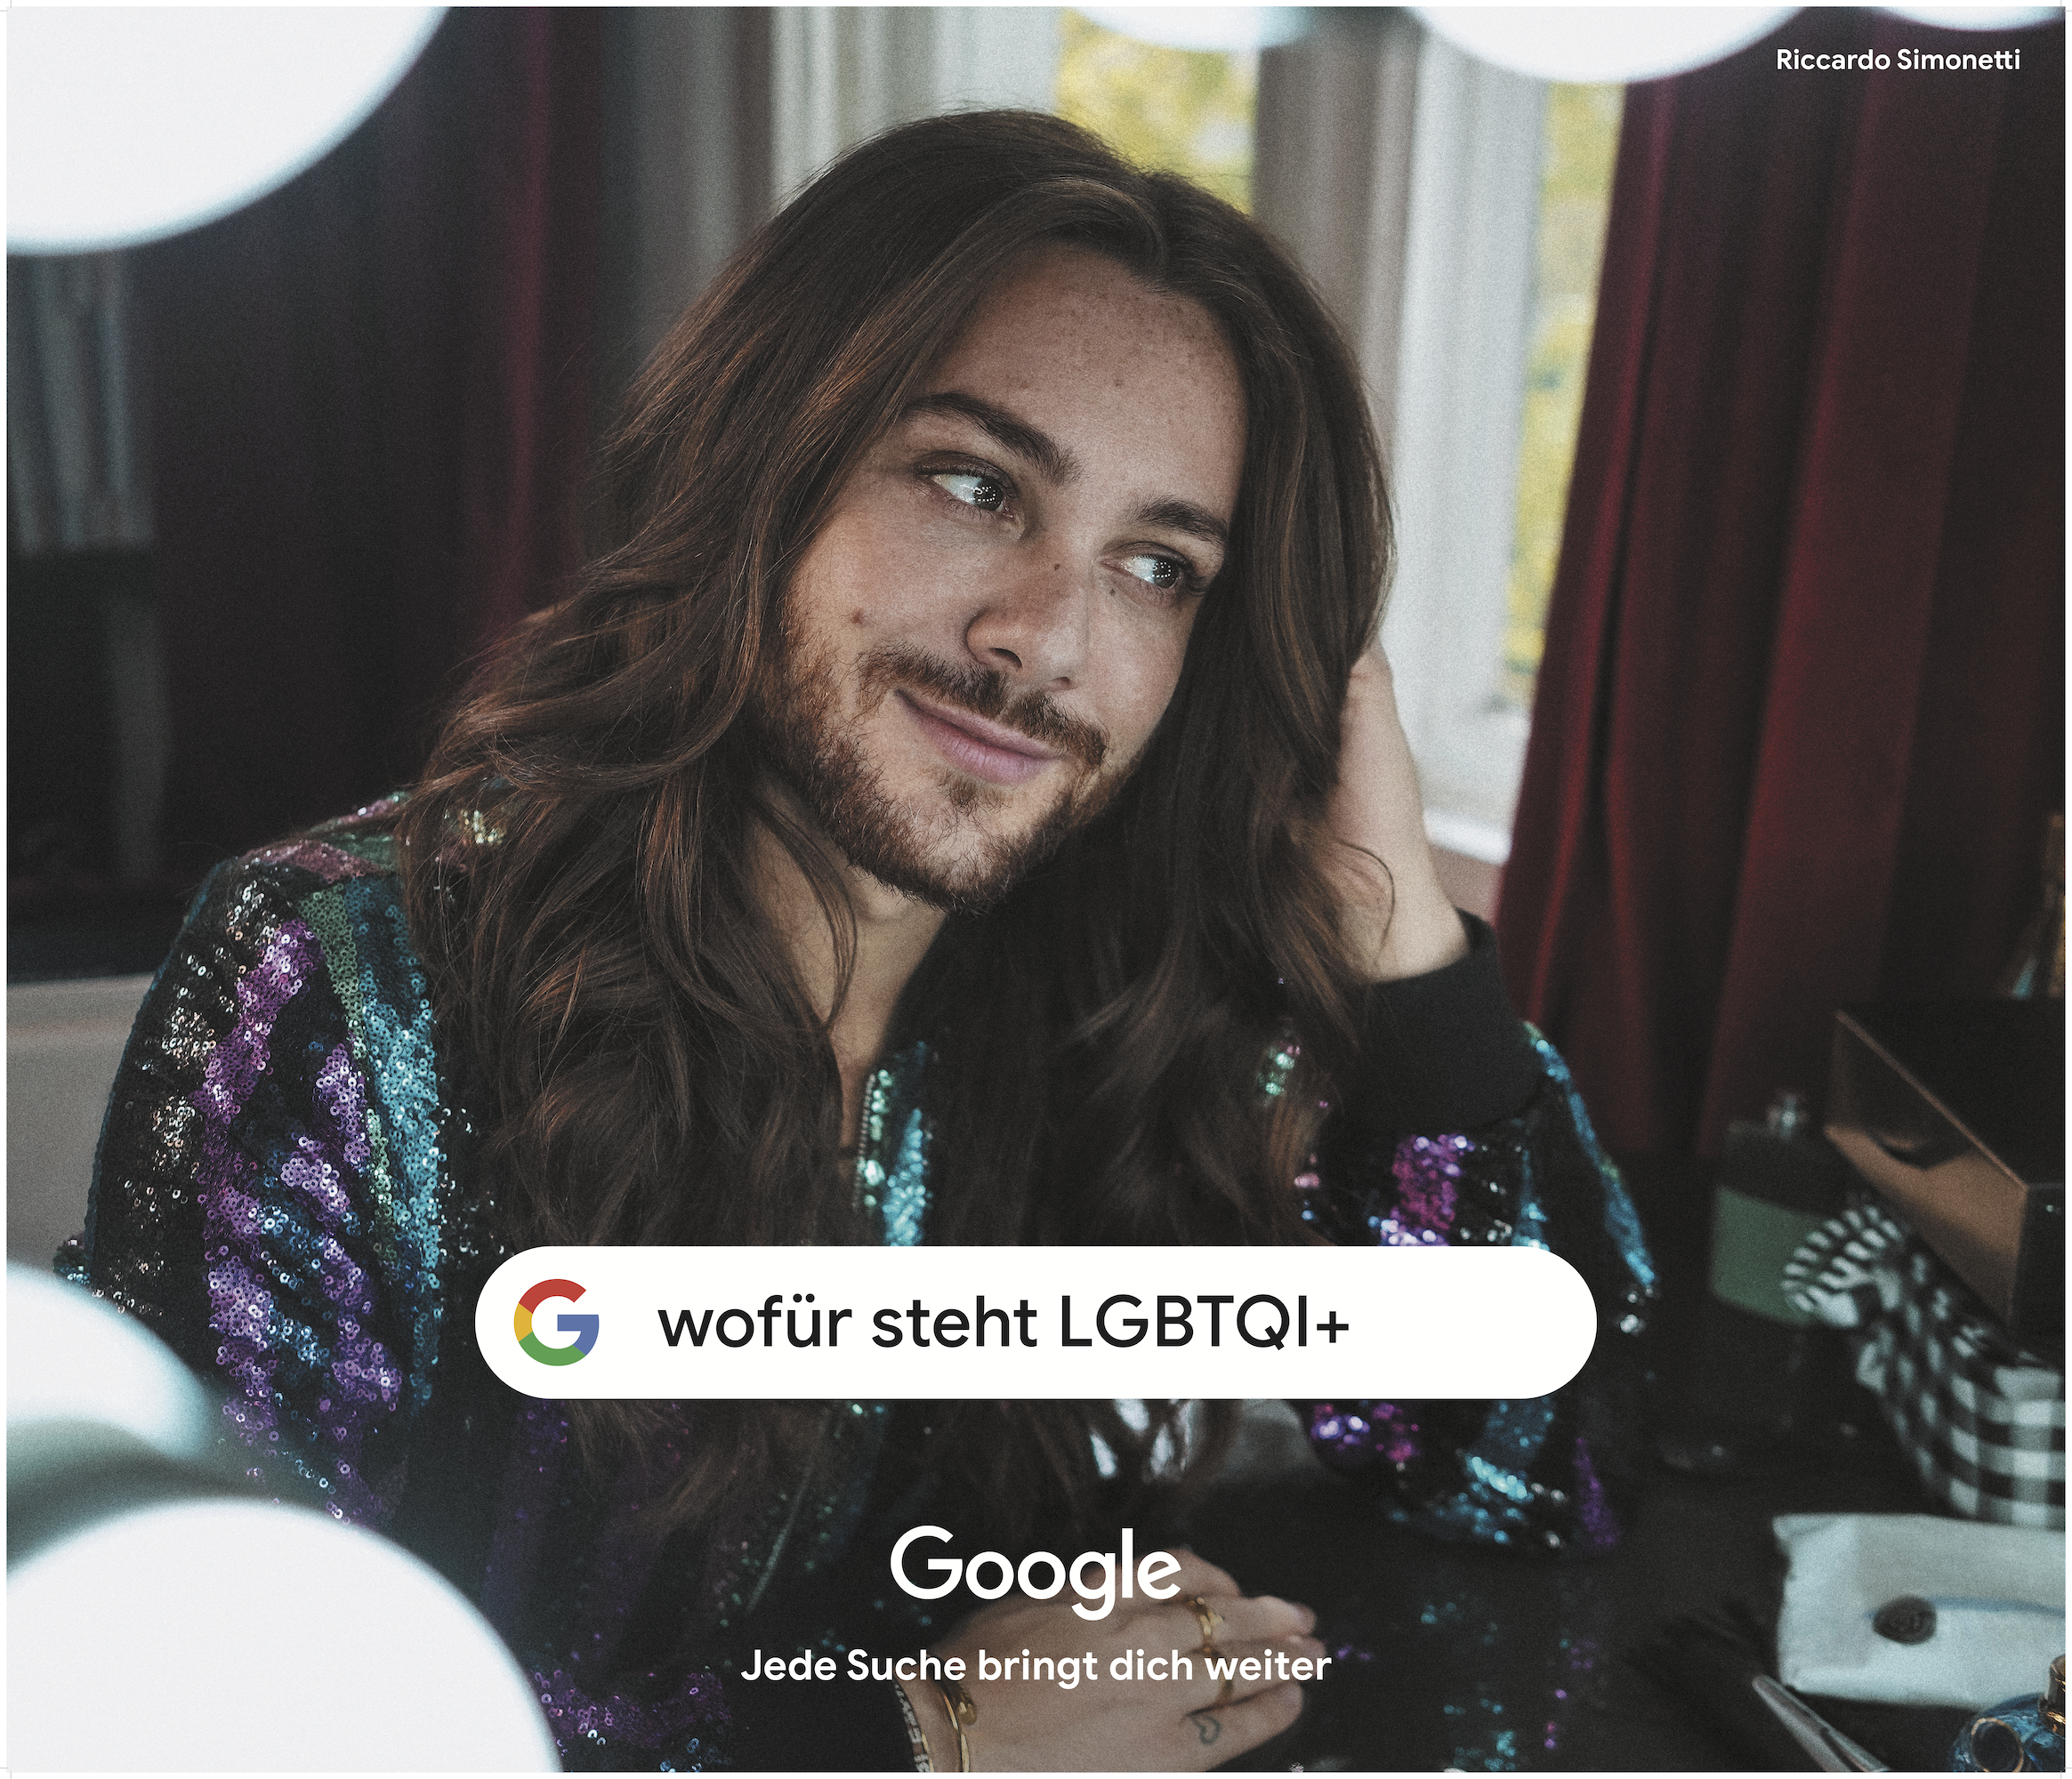 what does LGBTQI+ stand for